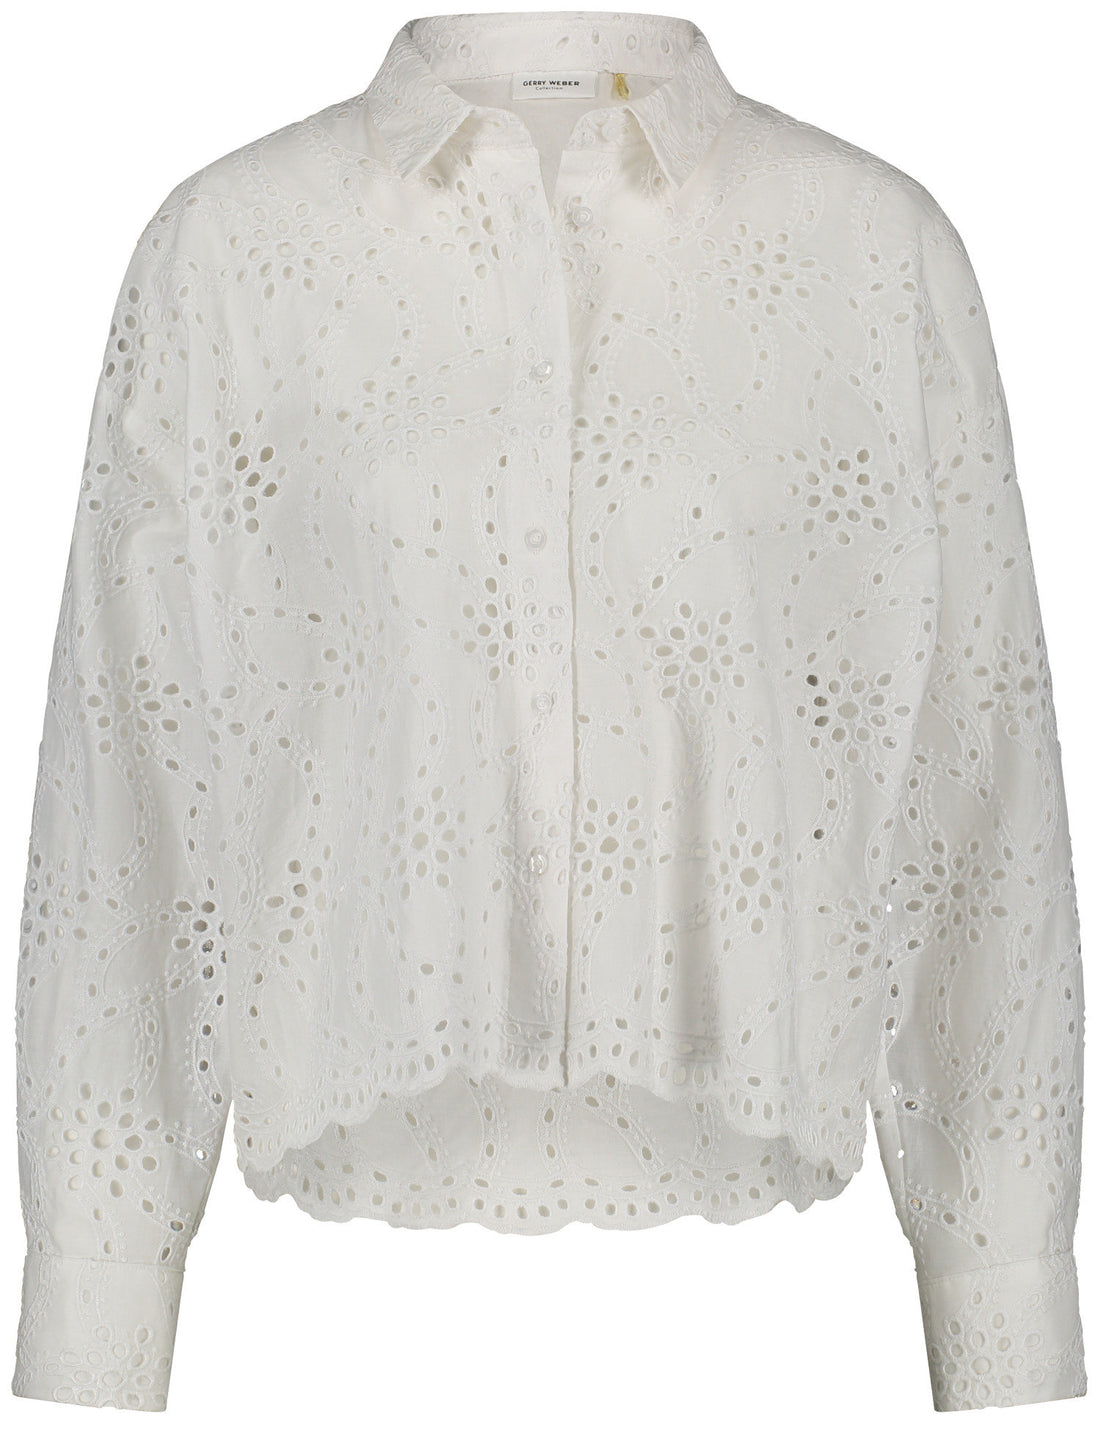 Blouse With A Decorative Openwork Pattern_360050-31446_99600_01